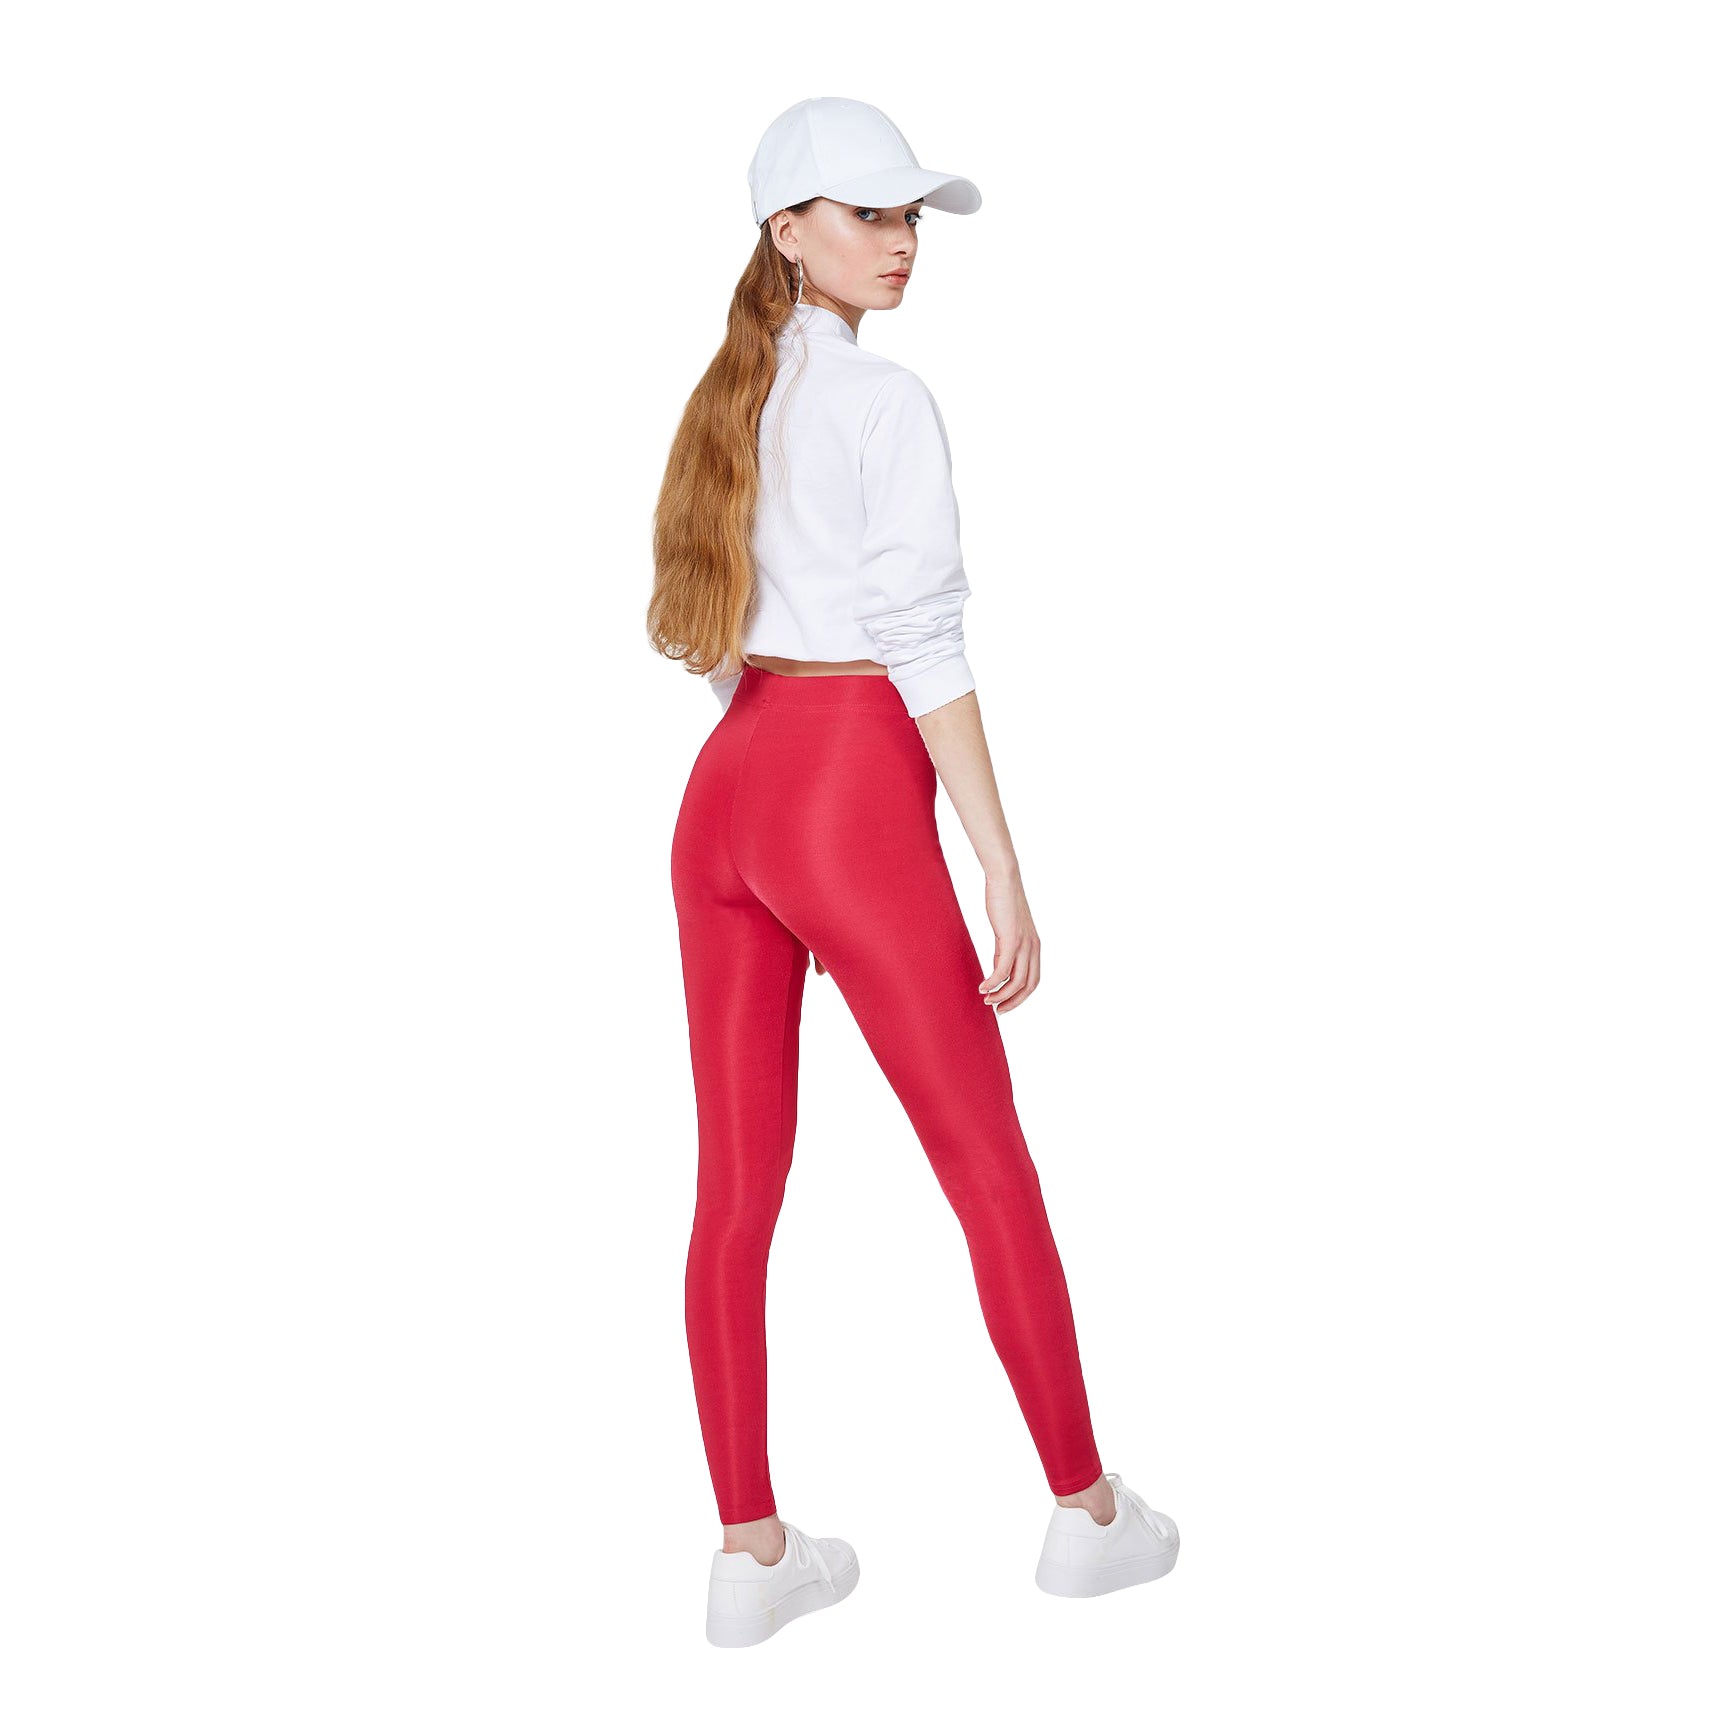 FashionTight Red Shiny High Waisted Leggings